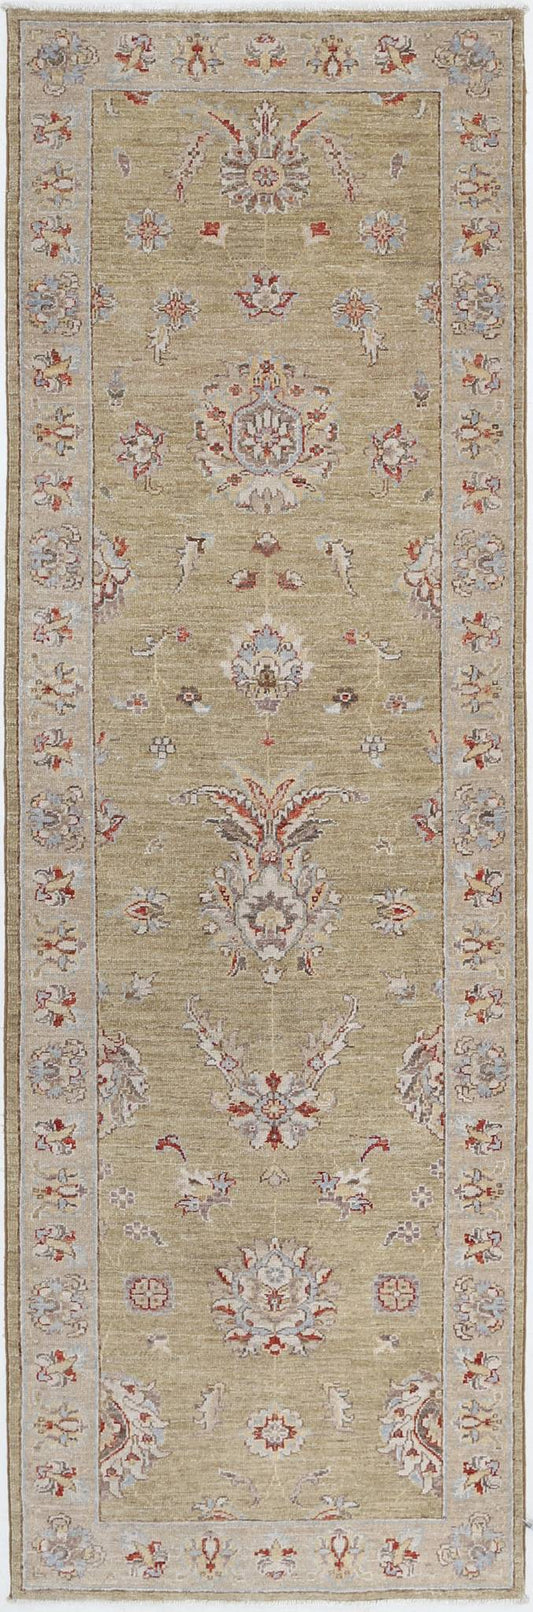 Traditional Hand Knotted Ziegler Farhan Wool Rug of Size 2'7'' X 8'0'' in Green and Ivory Colors - Made in Afghanistan